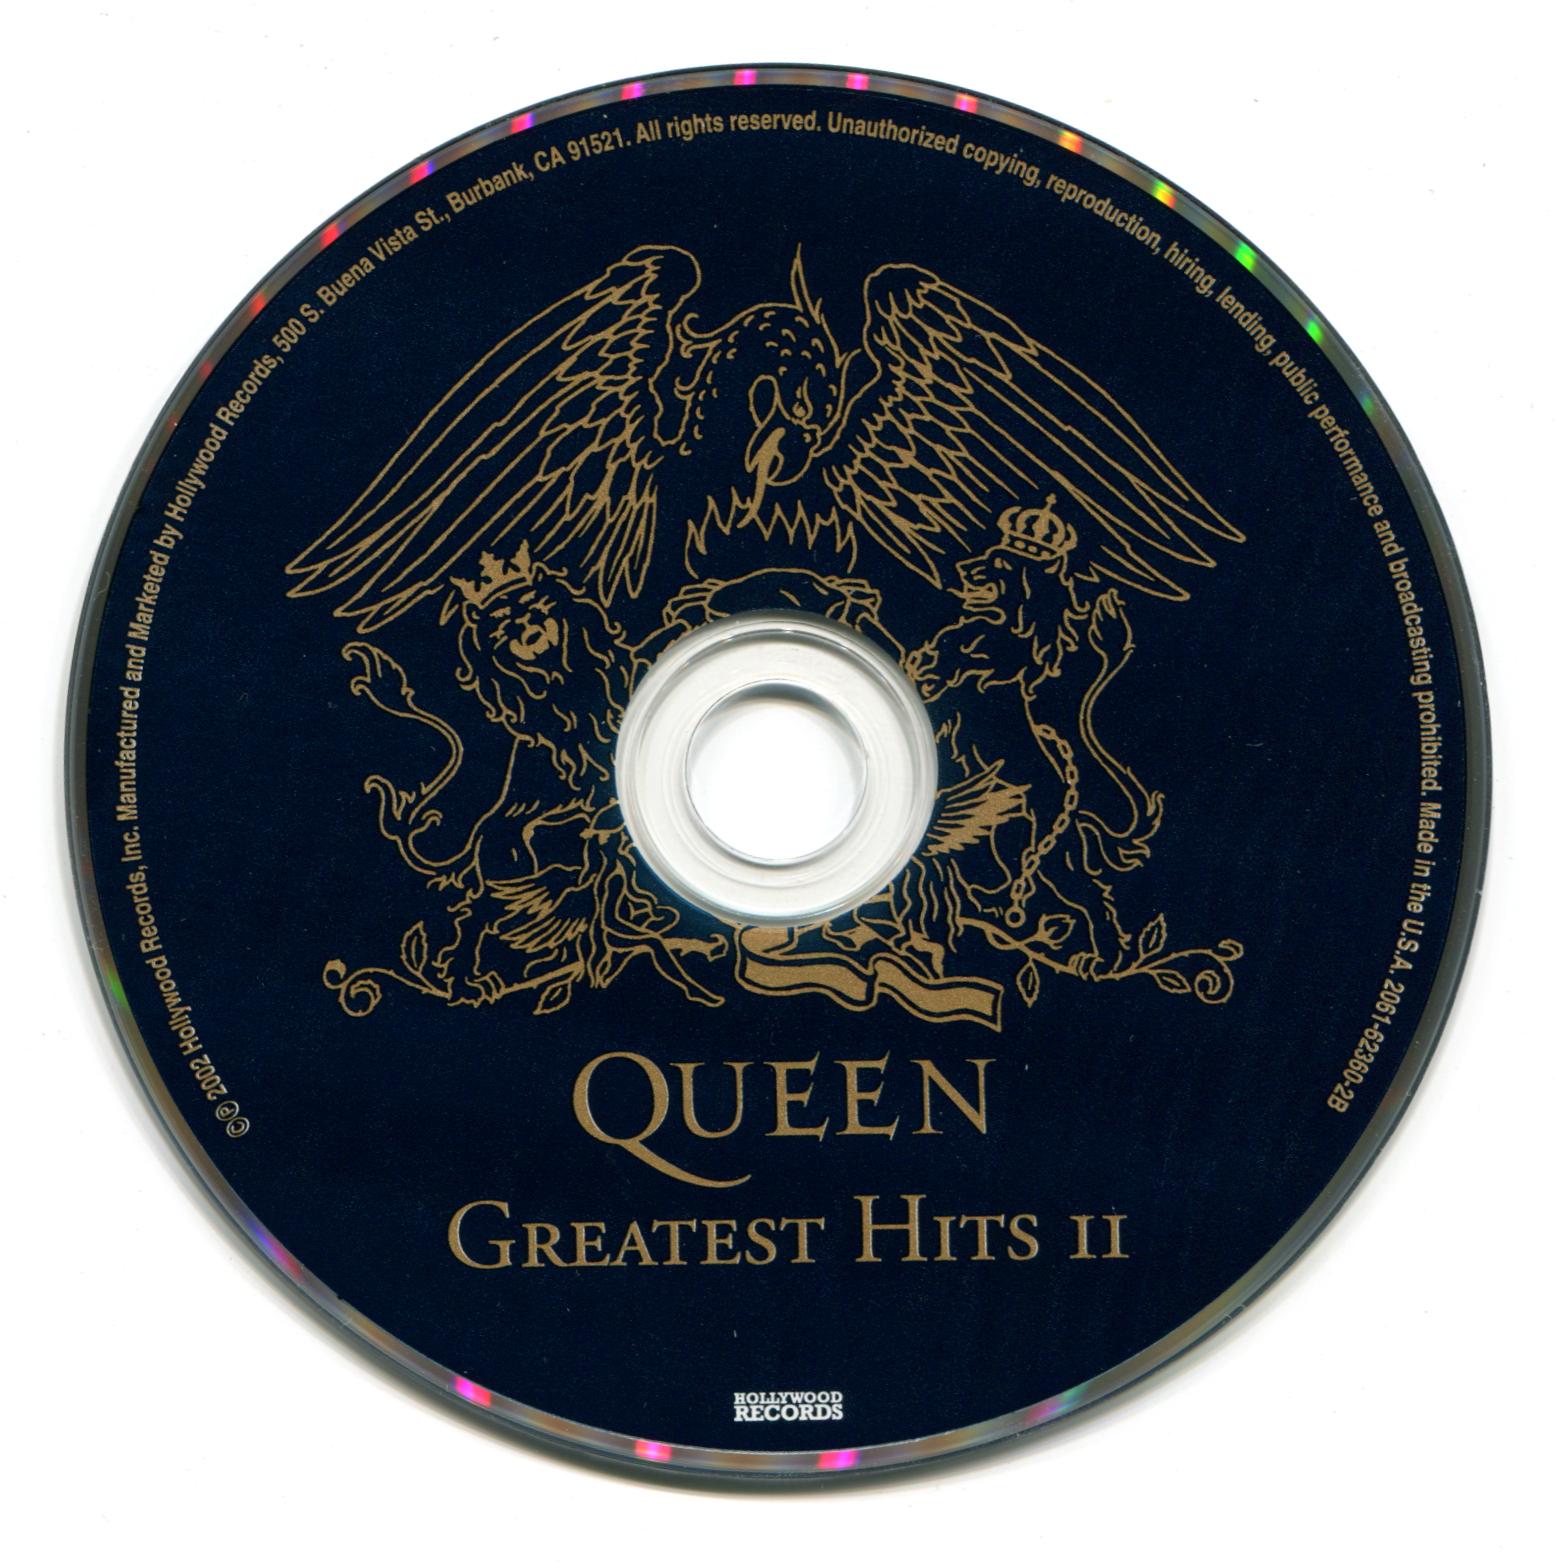 Greatest hits collection. Queen Greatest Hits 1 2 3 Platinum collection. "The Greatest Hits" Queen Касетта обложка. Компакт-диск Warner Queen – Platinum collection: Greatest Hits i II & III (3cd). Queen Greatest Hits 1981 CD.